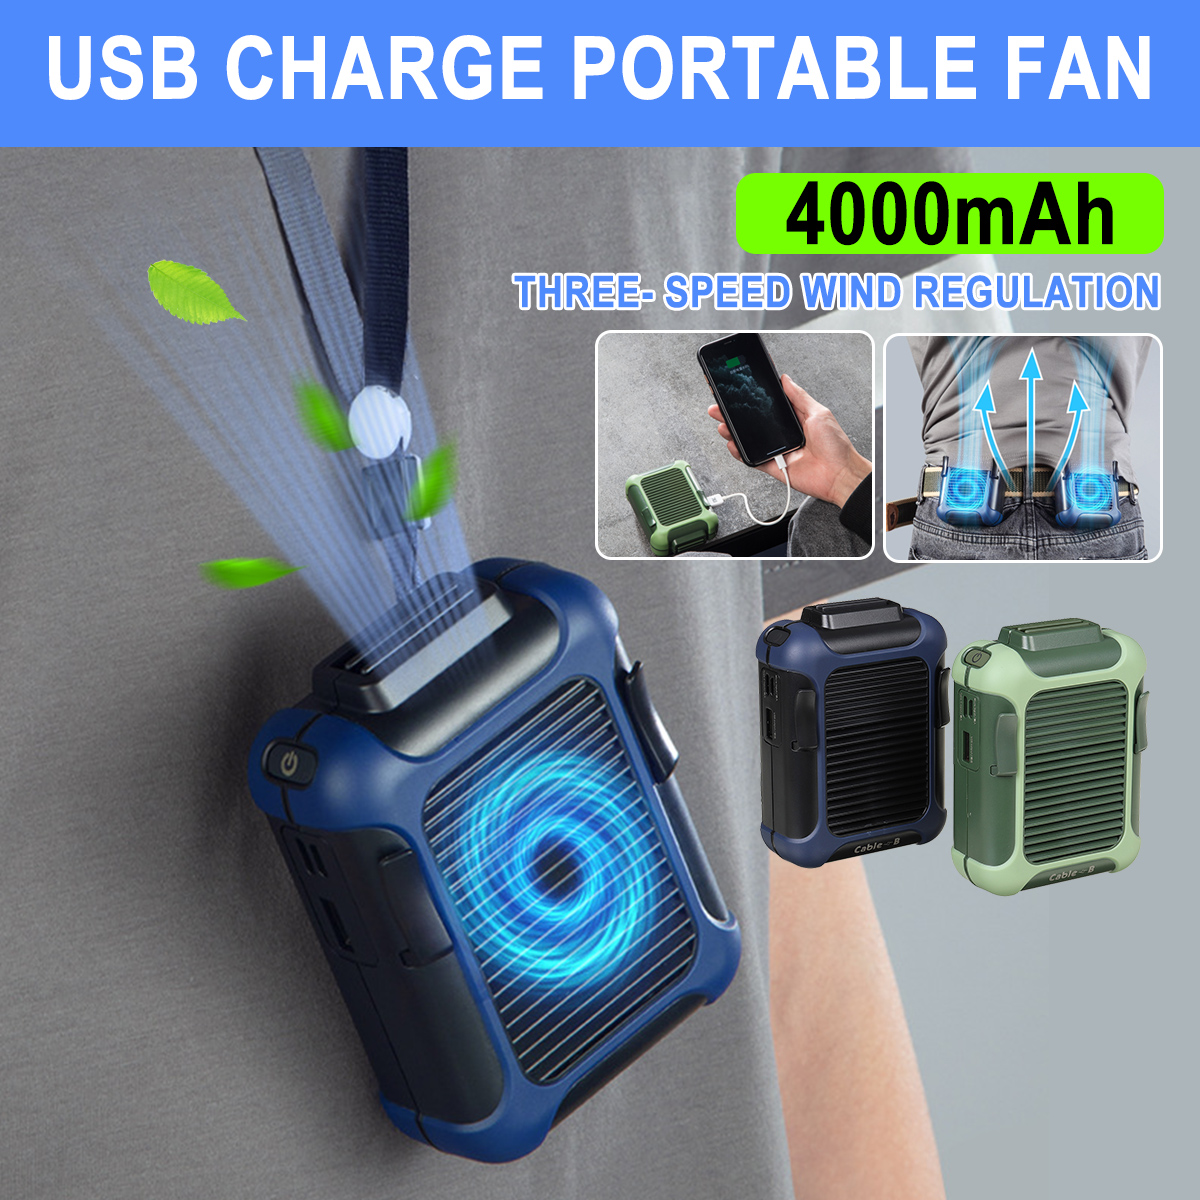 Mini-Neck-Air-Cooler-Fan-Waist-Clip-on-Fan-Lazy-Hands-Free-Hanging-Band-USB-Rechargeable-Handheld-Ev-1711567-2